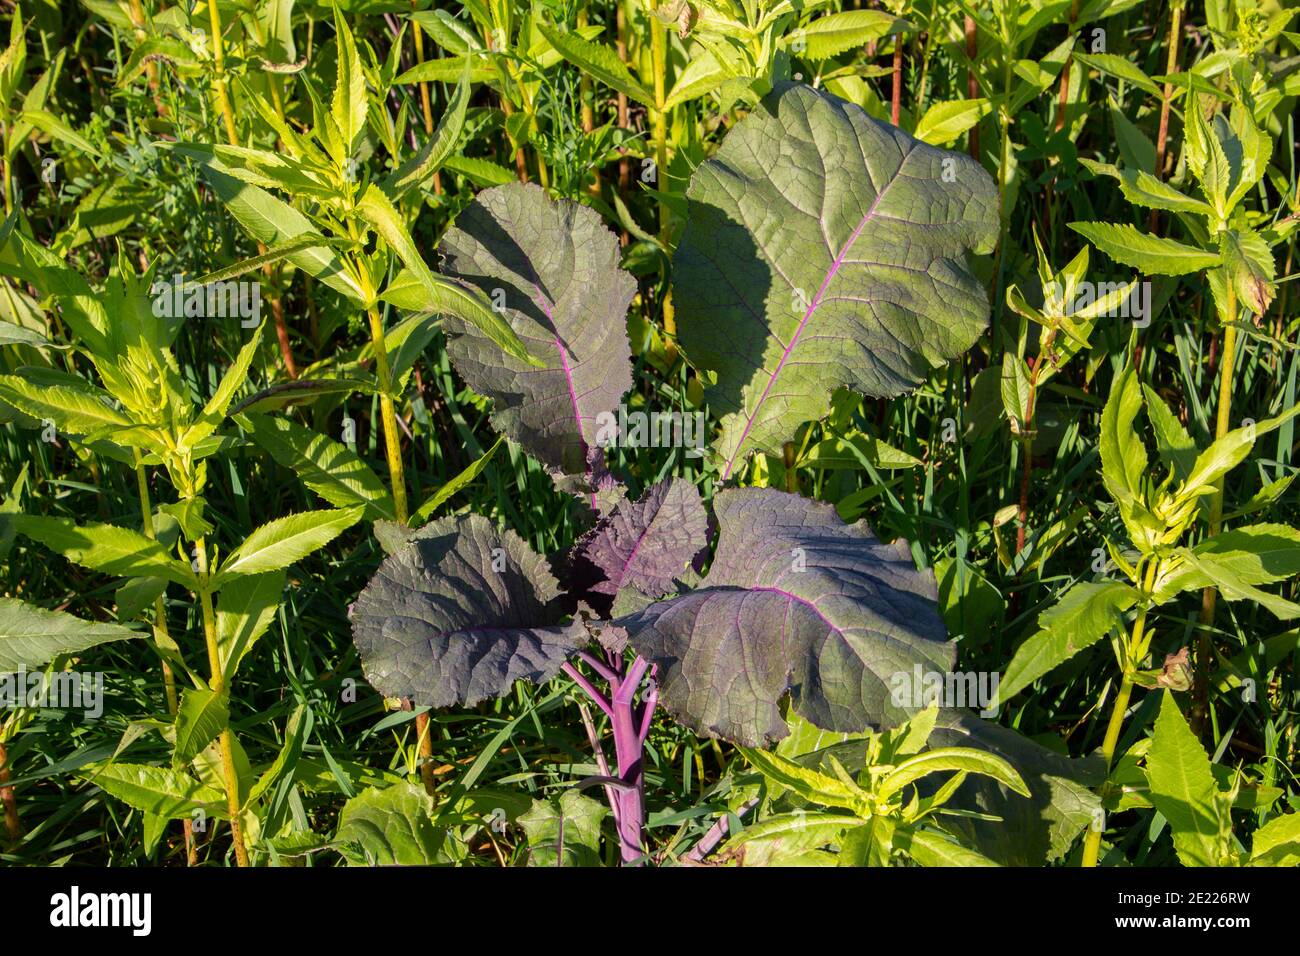 Purple leaf mustard plant growing in a field with other plants, also called Brassica juncea, Korean red mustard or Japanese giant red mustard Stock Photo